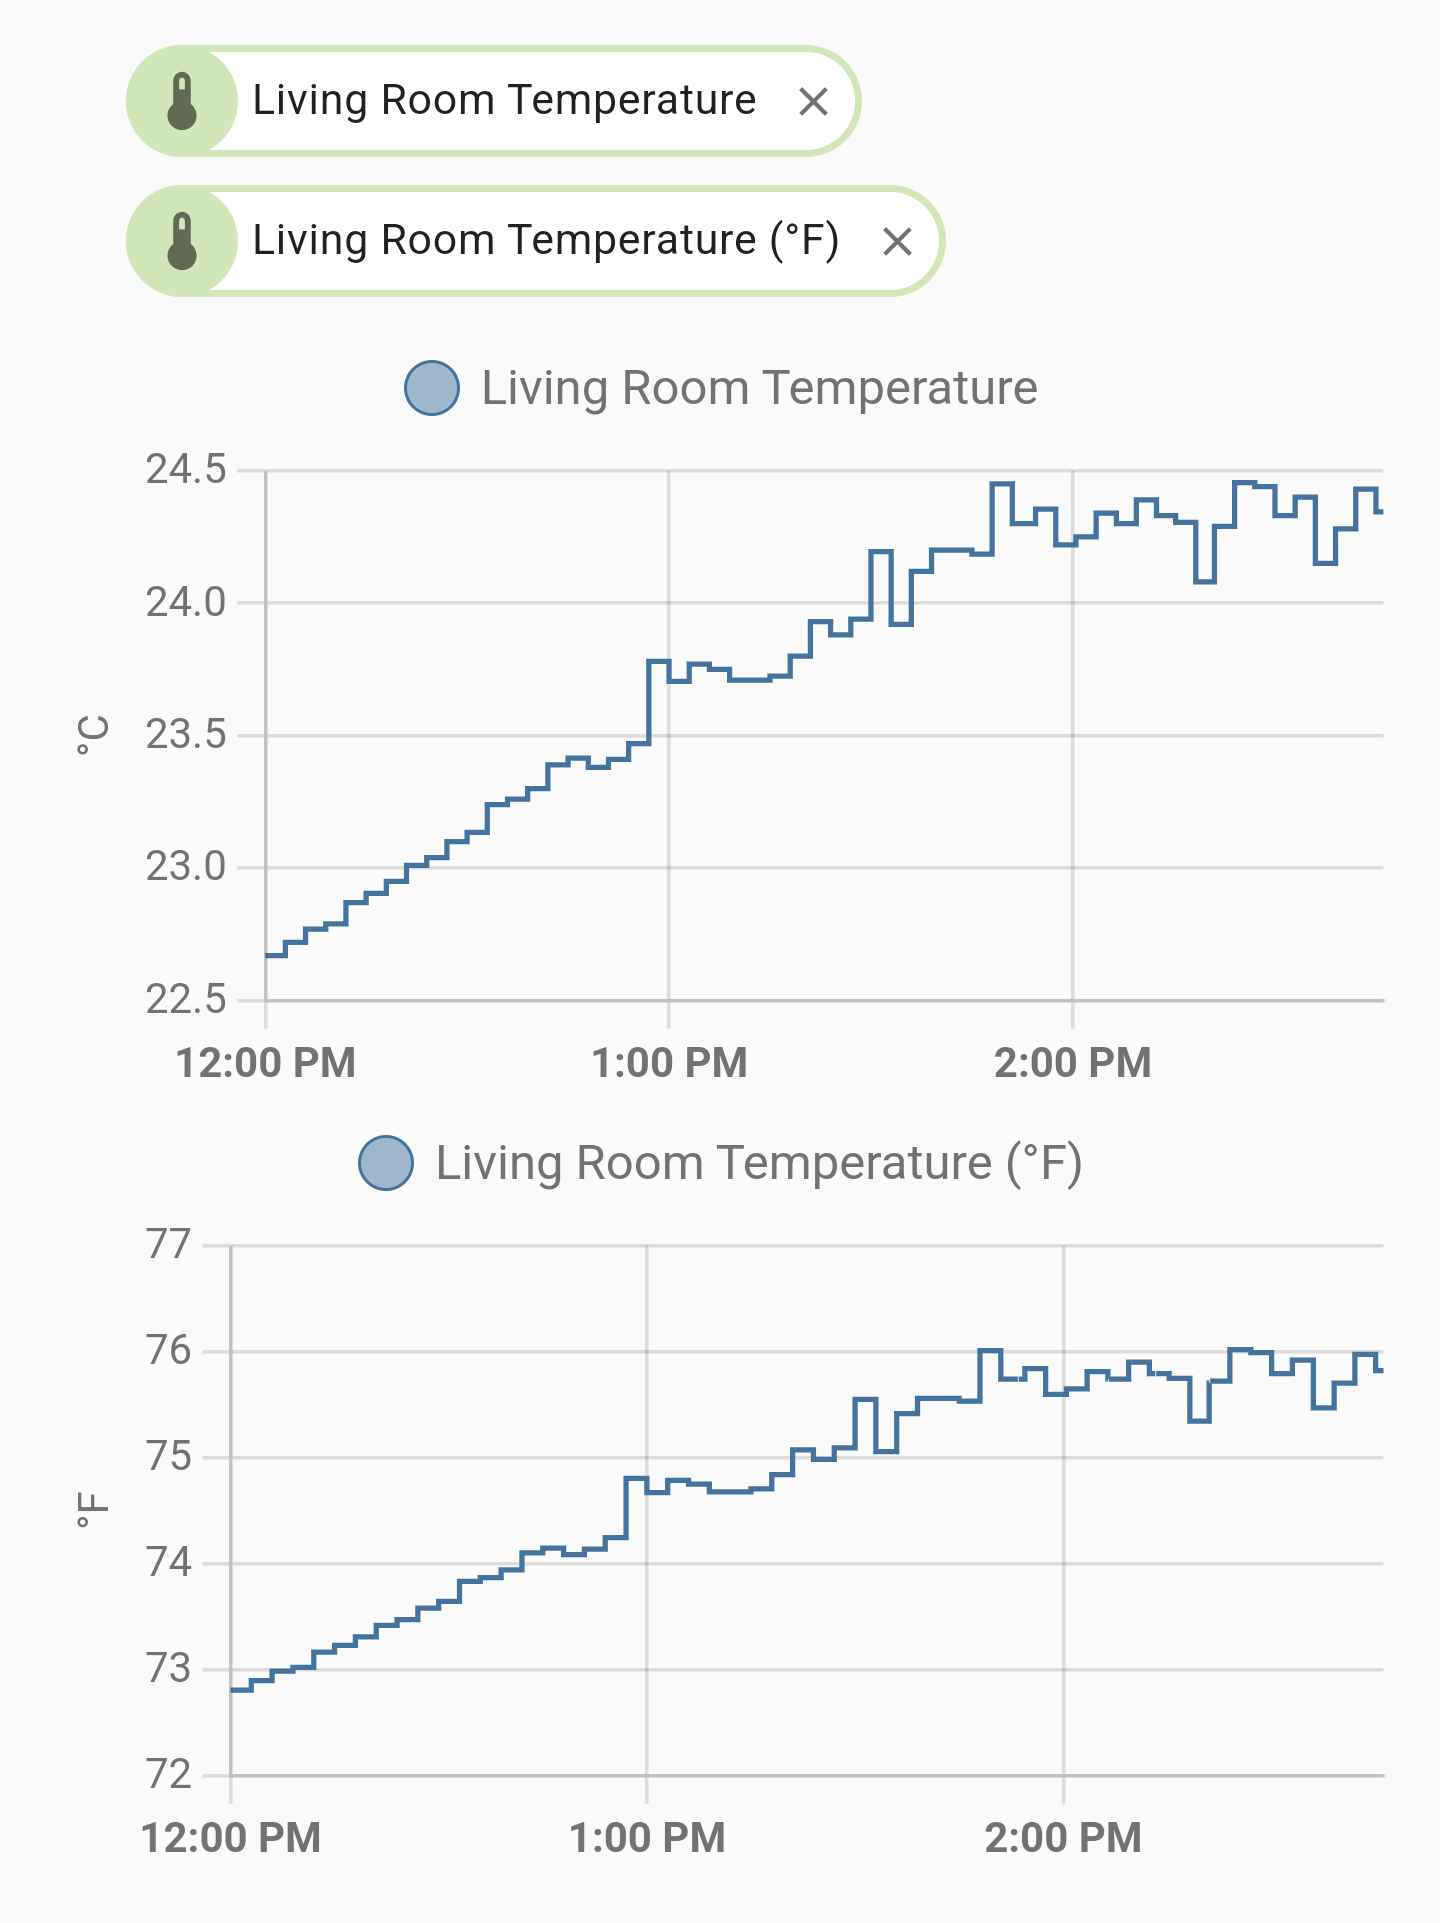 Celsius and converted Fahrenheit values in Home Assistant